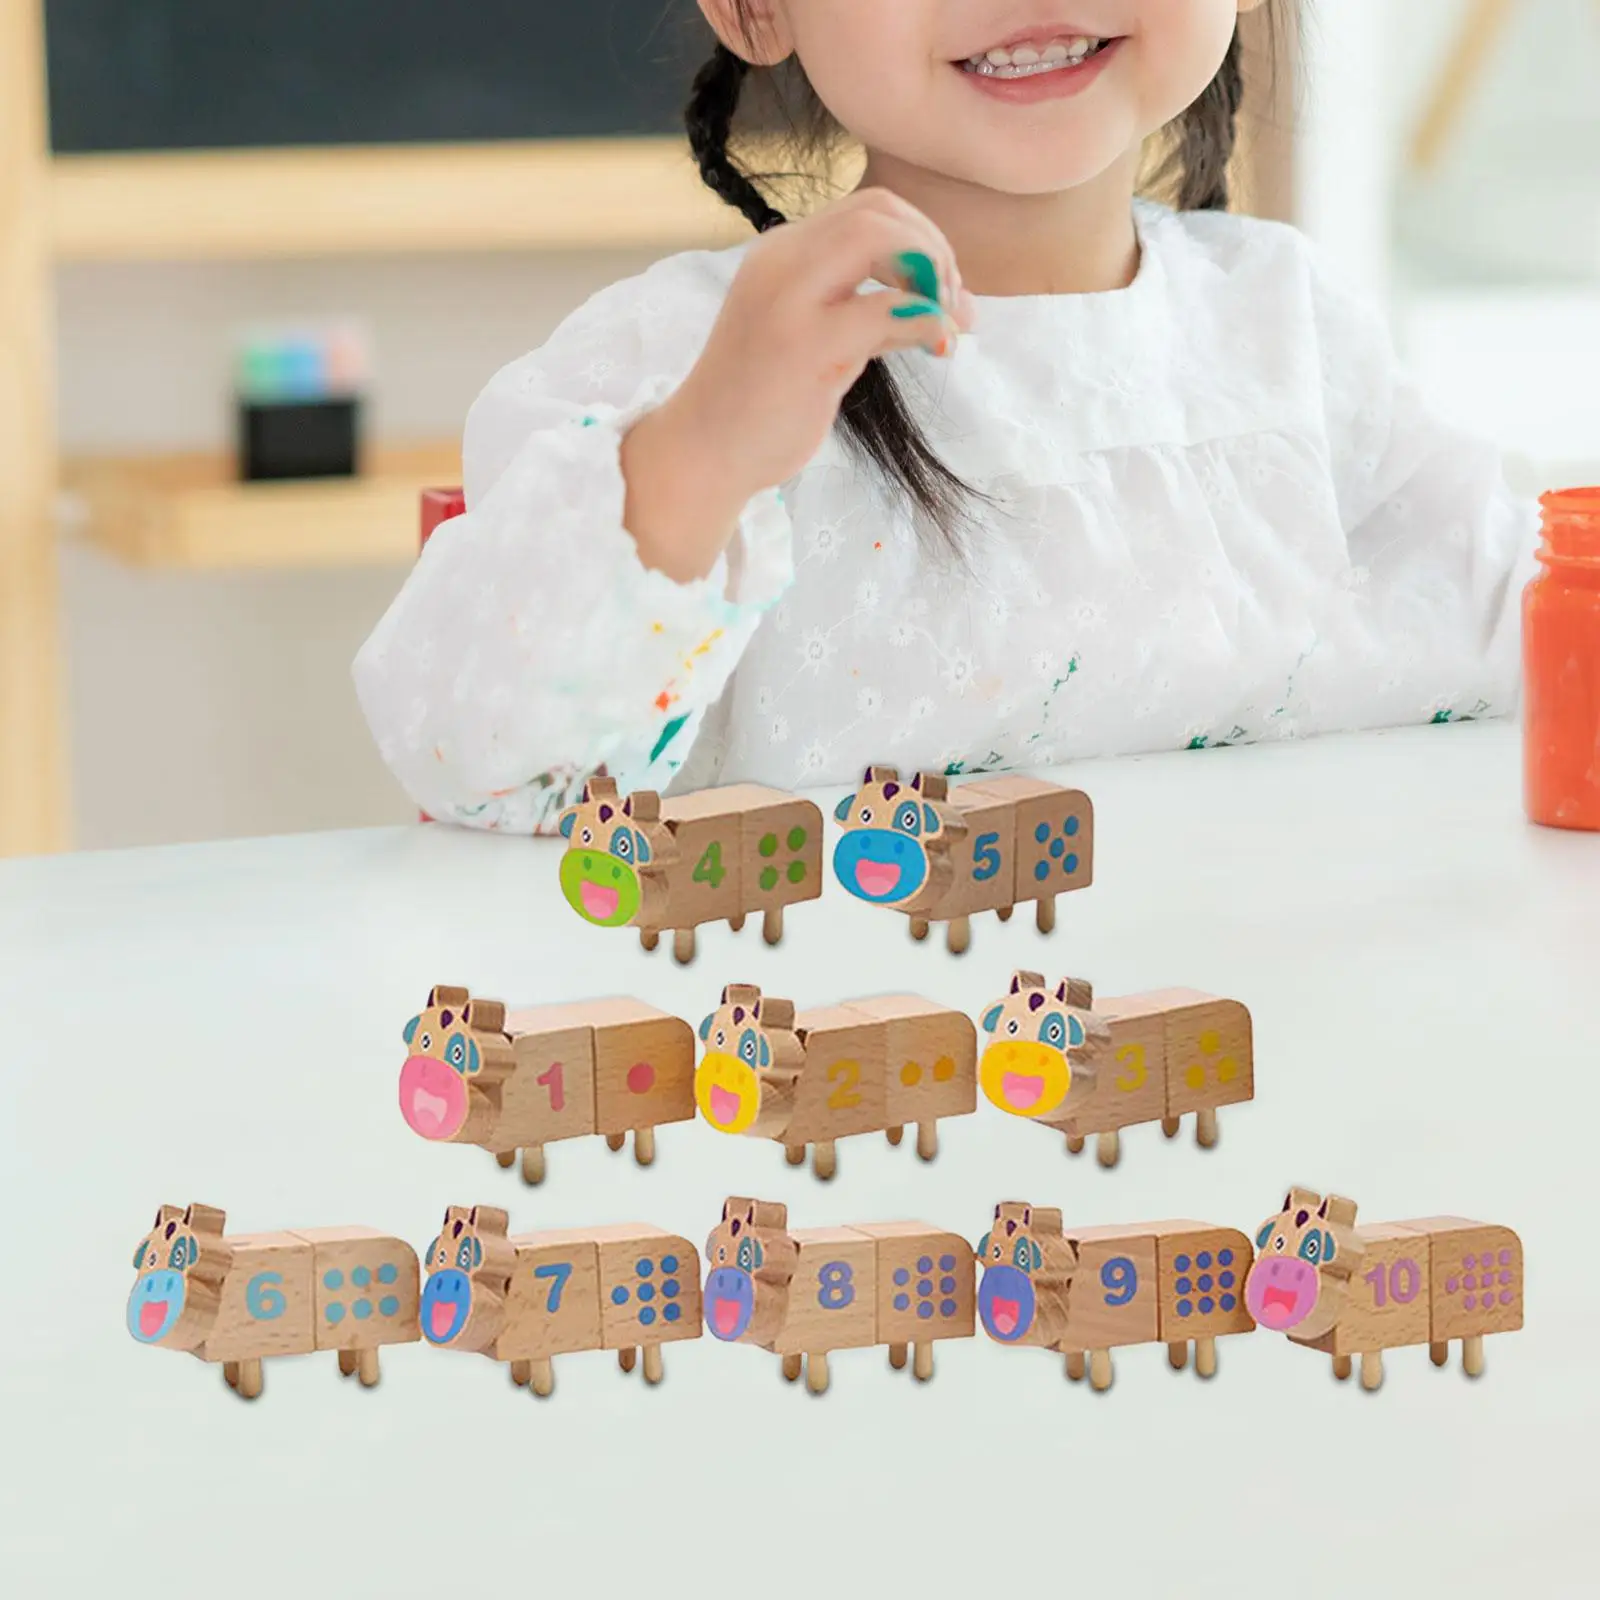 10x Wooden Building Blocks for Toddlers Early Learning Stacking Games Colored Montessori Toys Educational Toys for Girls Gifts